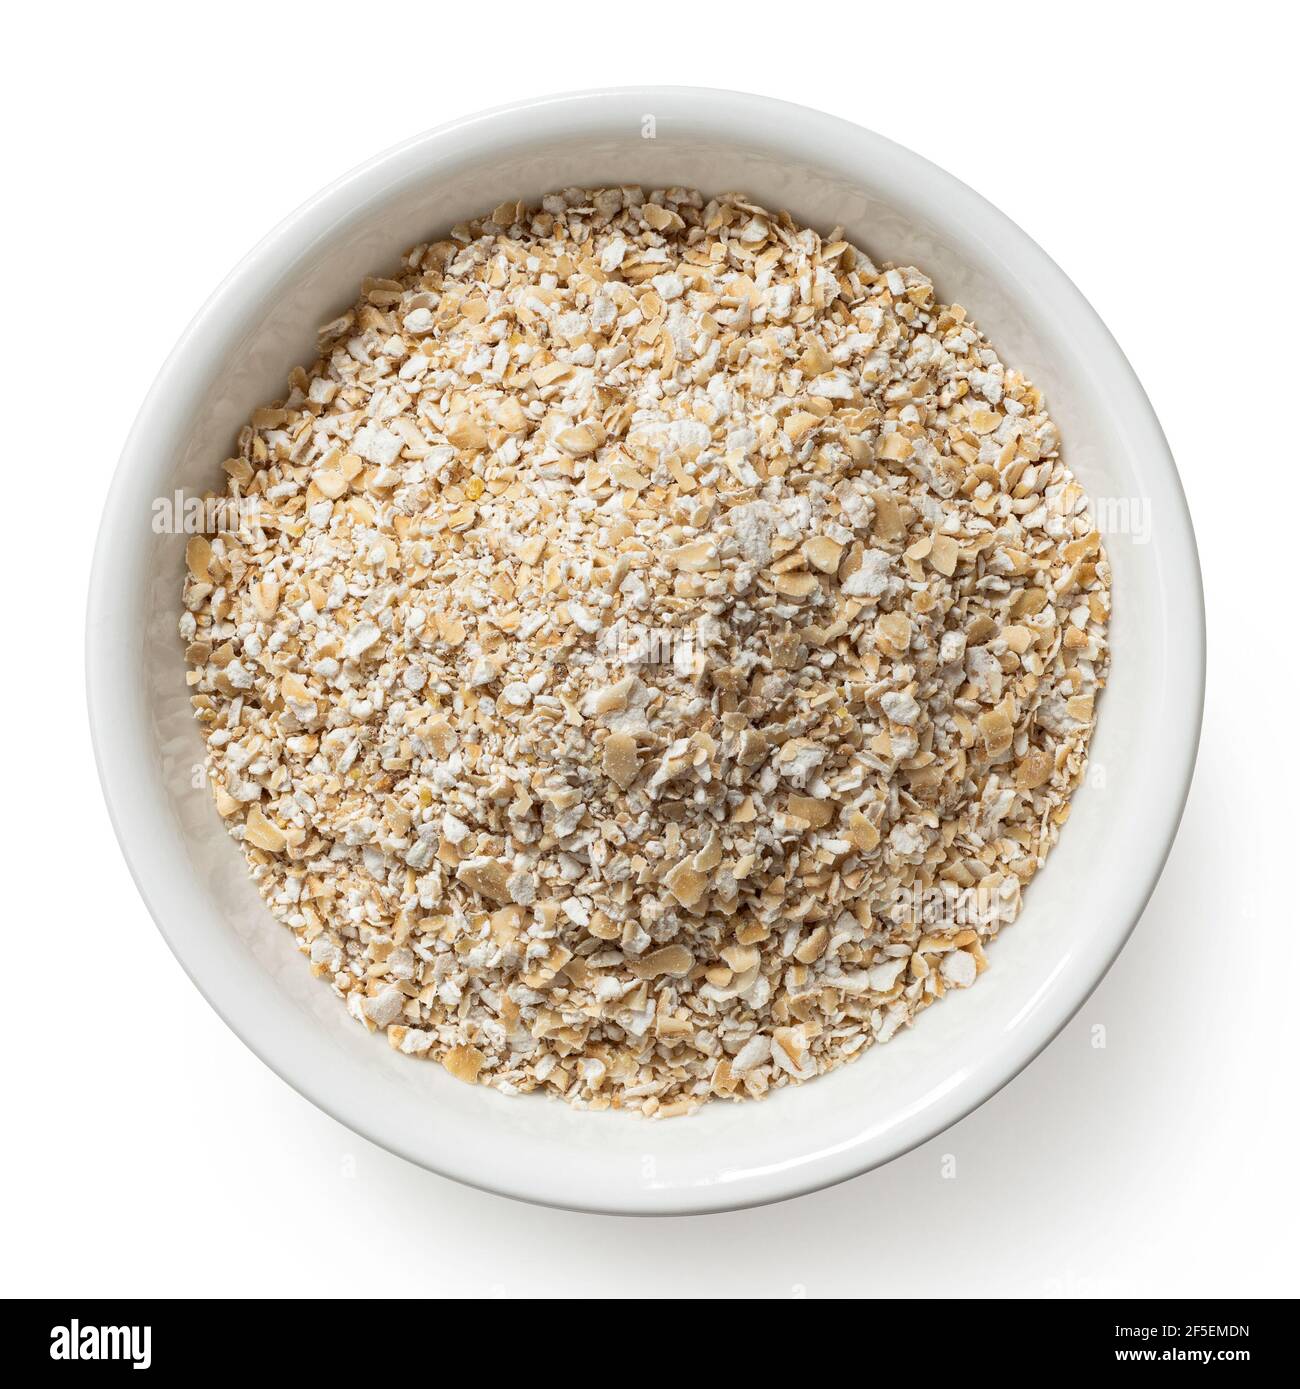 Uncooked coarse oatmeal in a white ceramic bowl isolated on white. Top view. Stock Photo